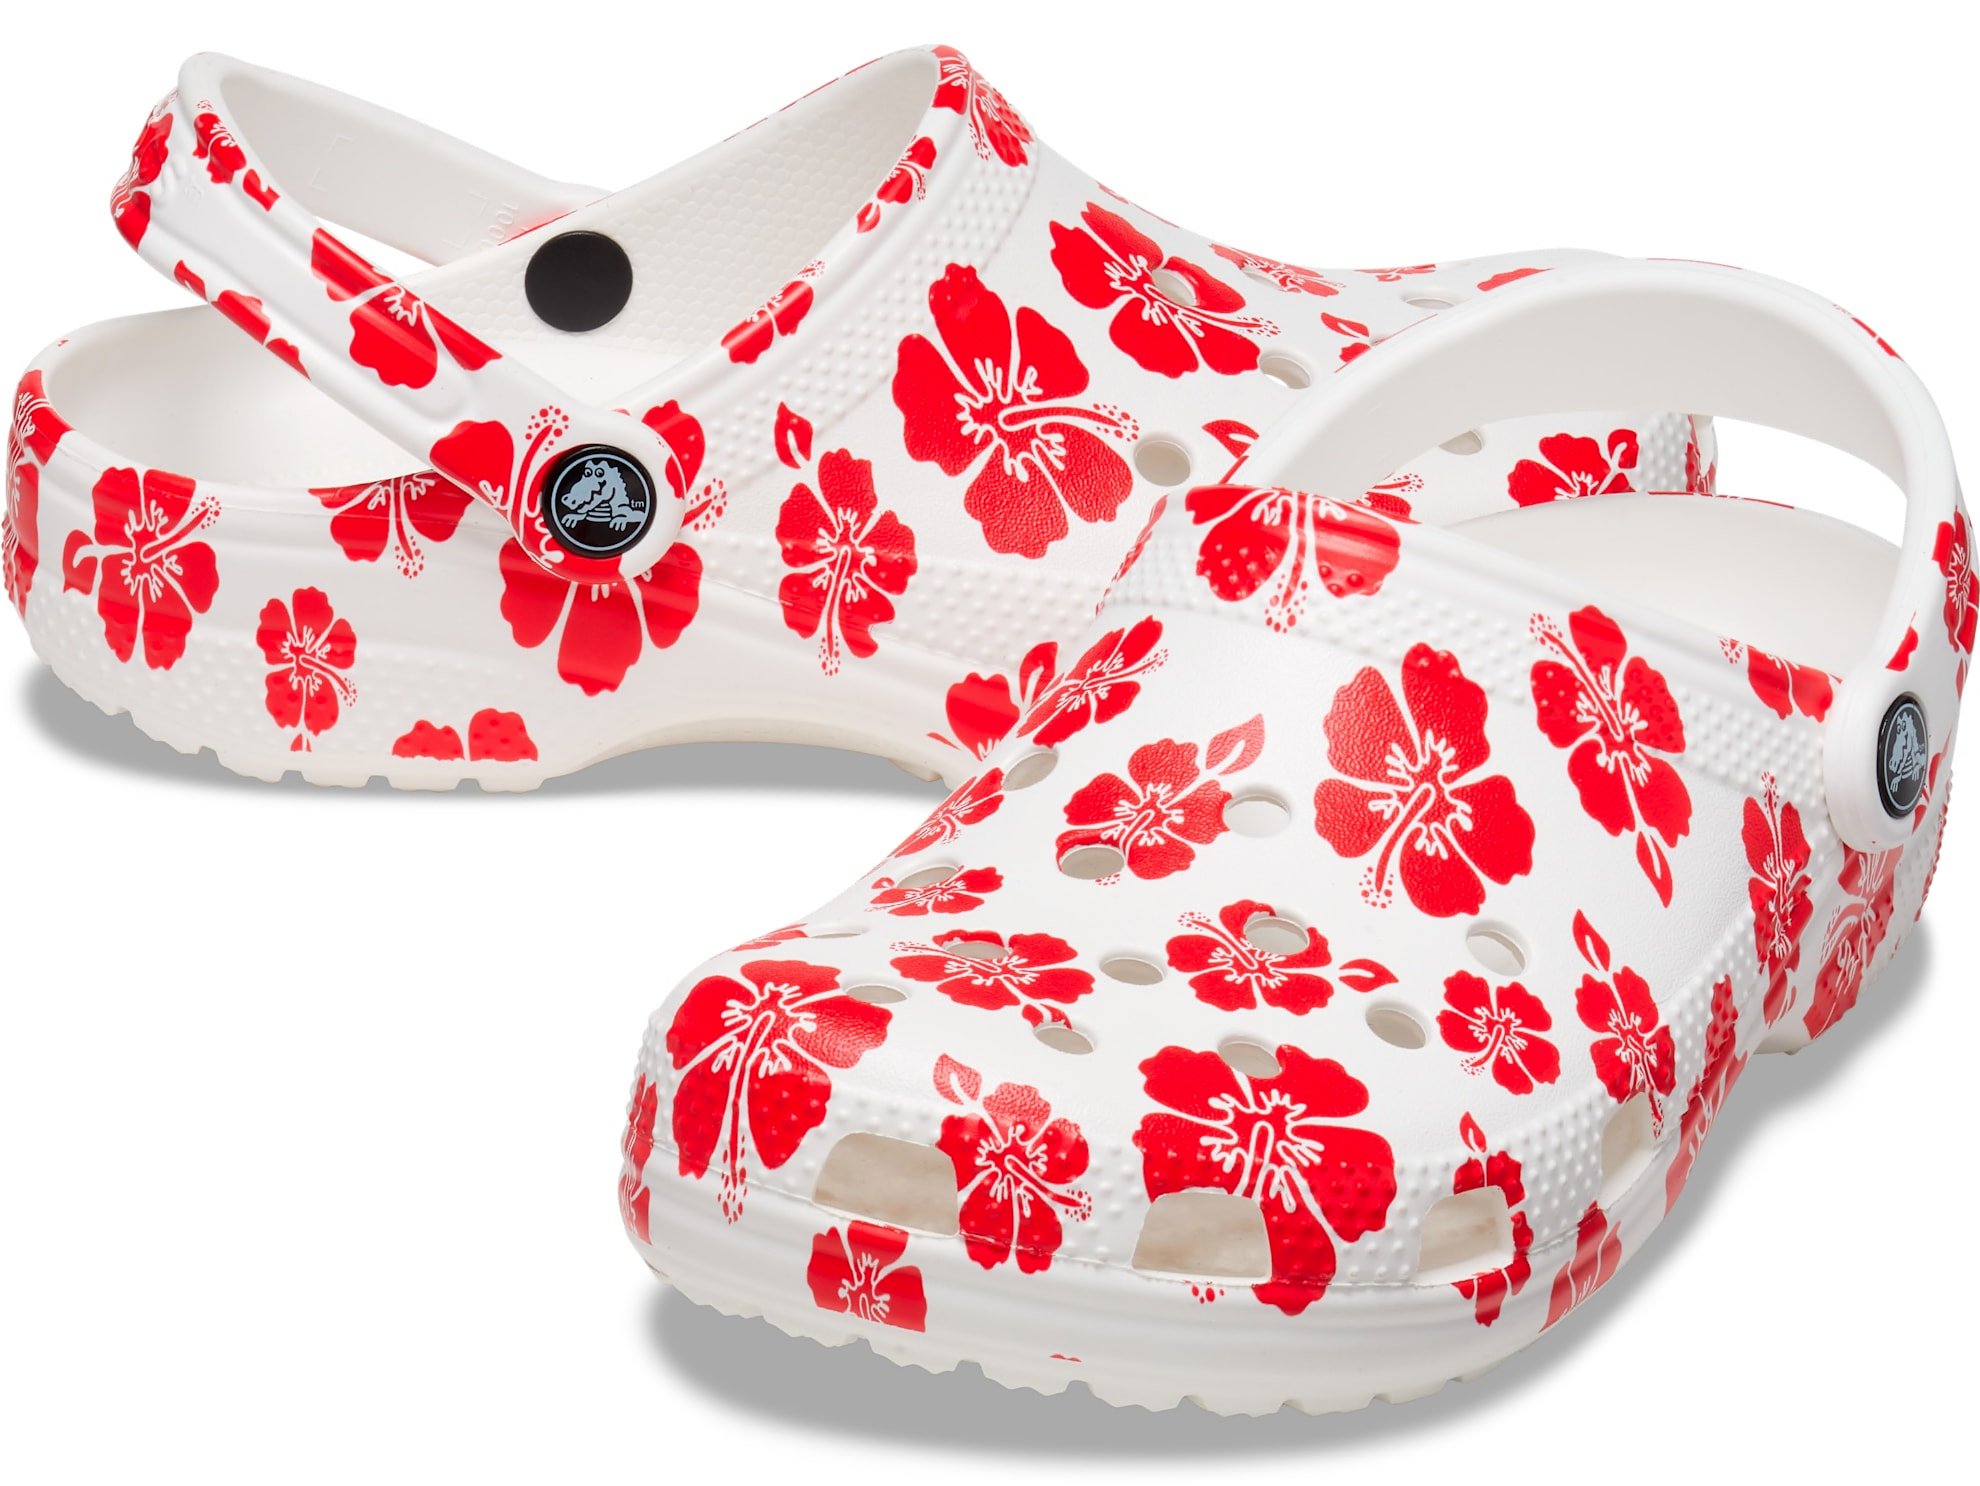 The iconic Crocs clogs designed with summery Hibiscus Flower prints